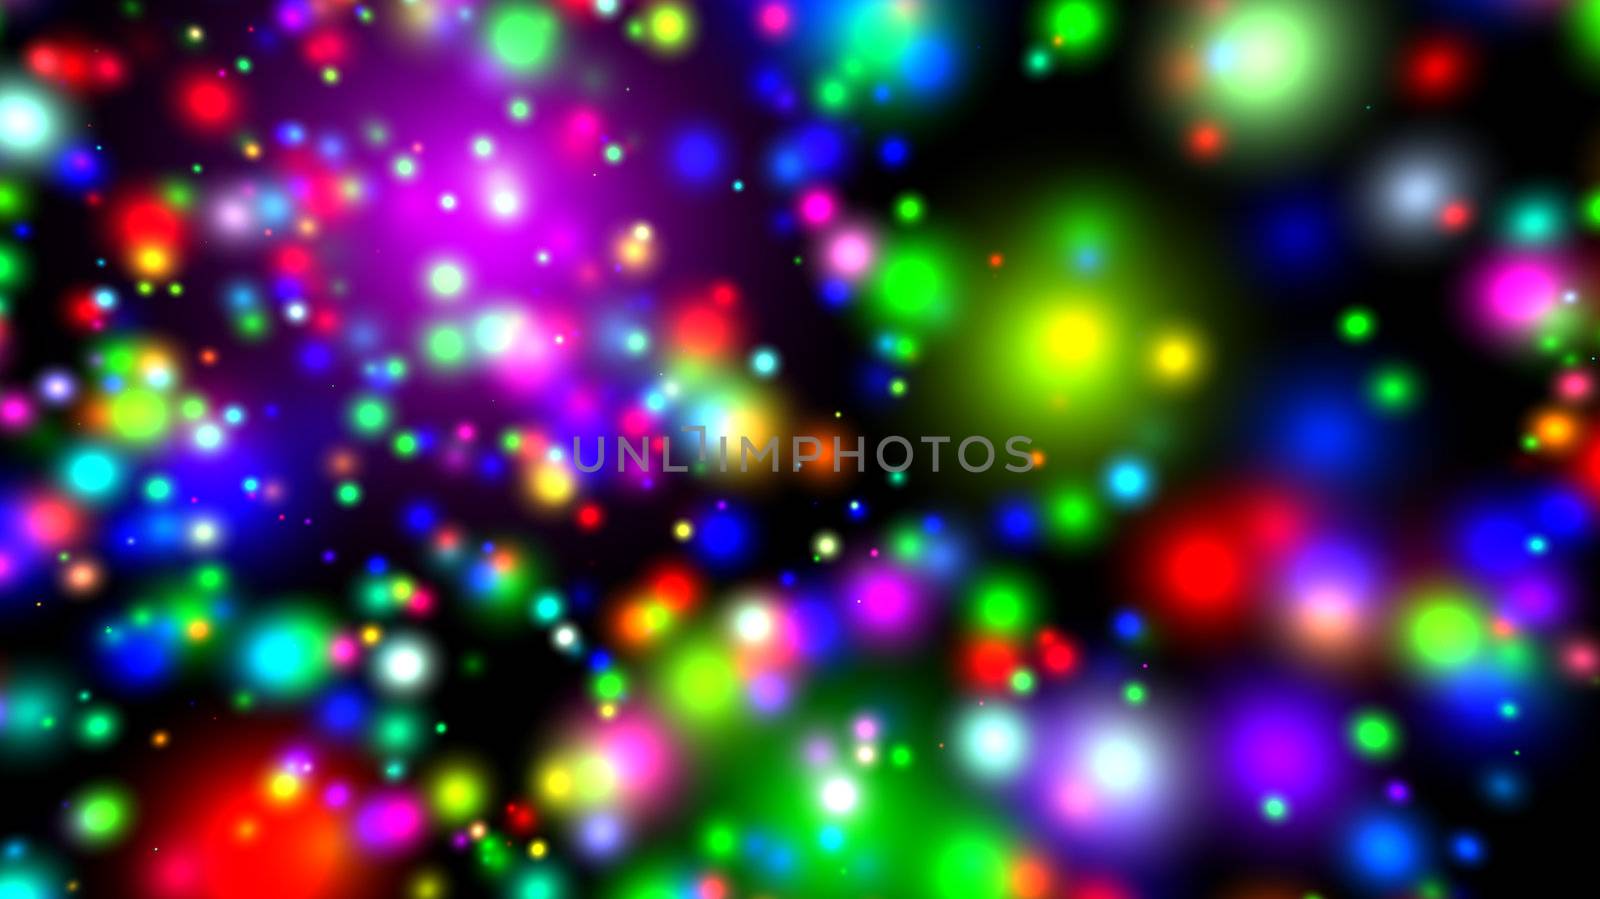 Colorful abstract background with different size lights